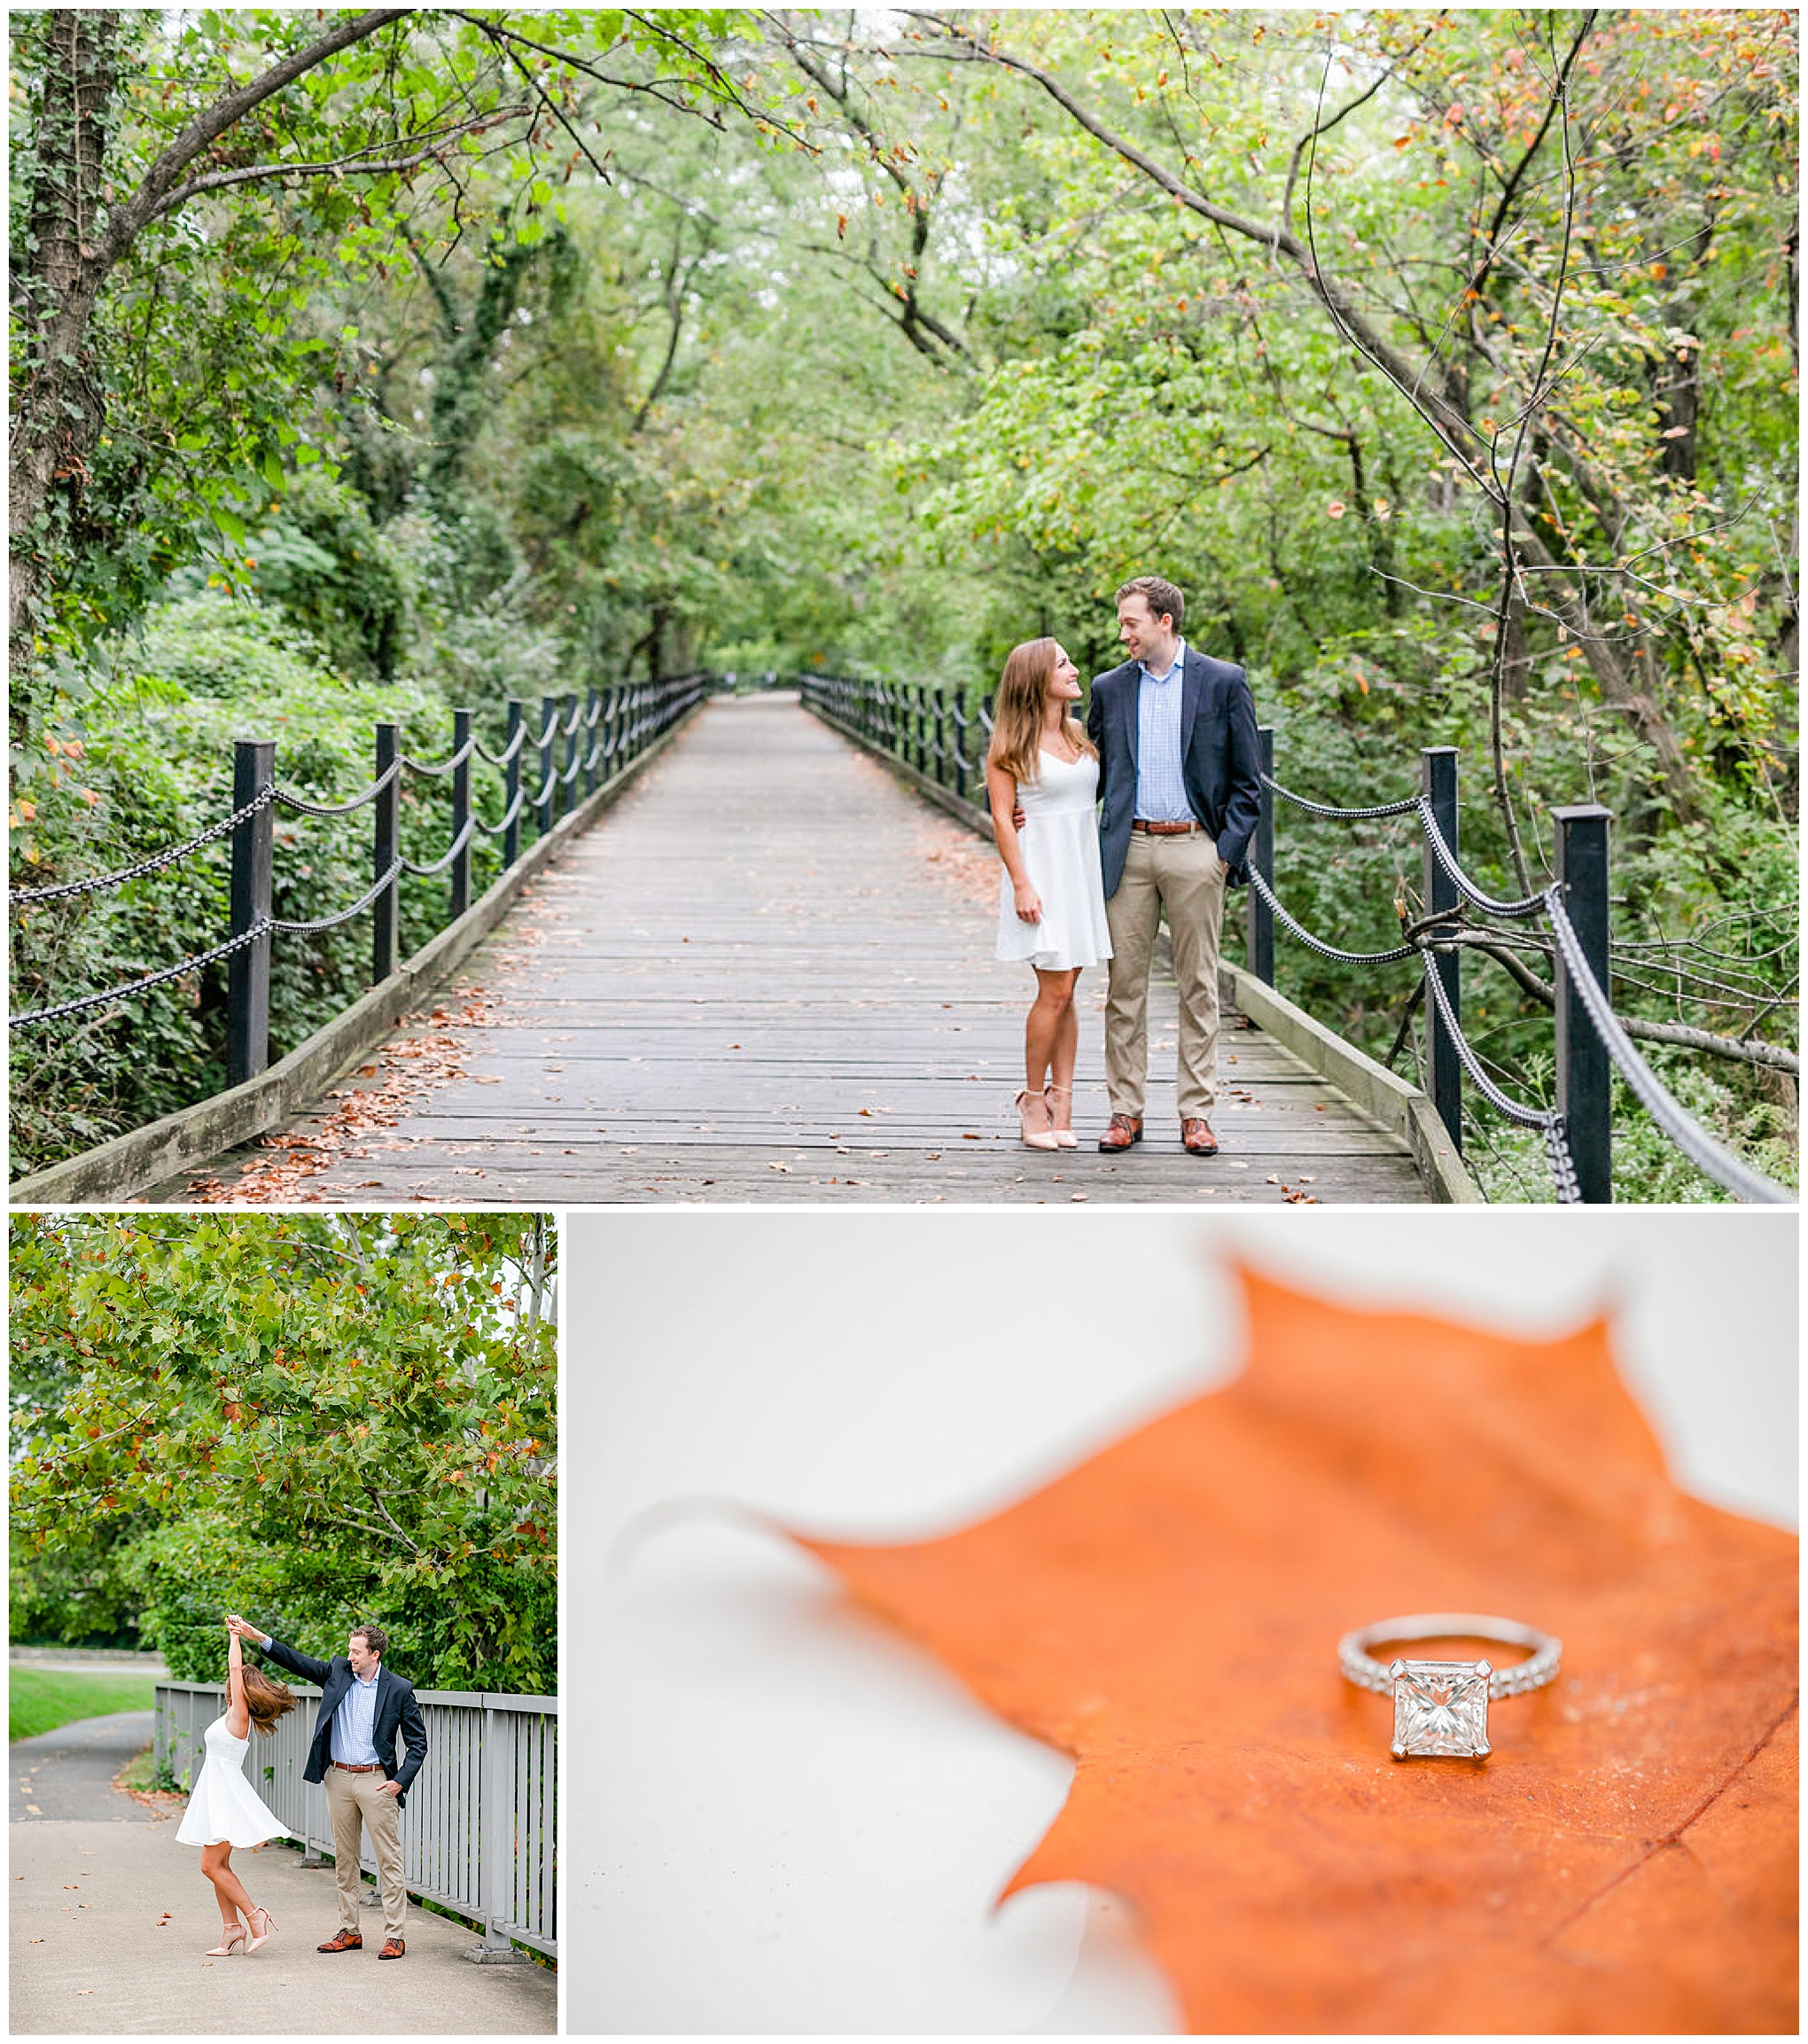 GW Parkway engagement photos, Roosevelt Island engagement photos, Mt. Vernon Trail engagement photos, Arlington engagement photos, DC engagement photos, waterfront engagement photos, autumn engagement photos, natural light engagement photos, Rachel E.H. Photography, engagement ring on leaf, man twirling woman